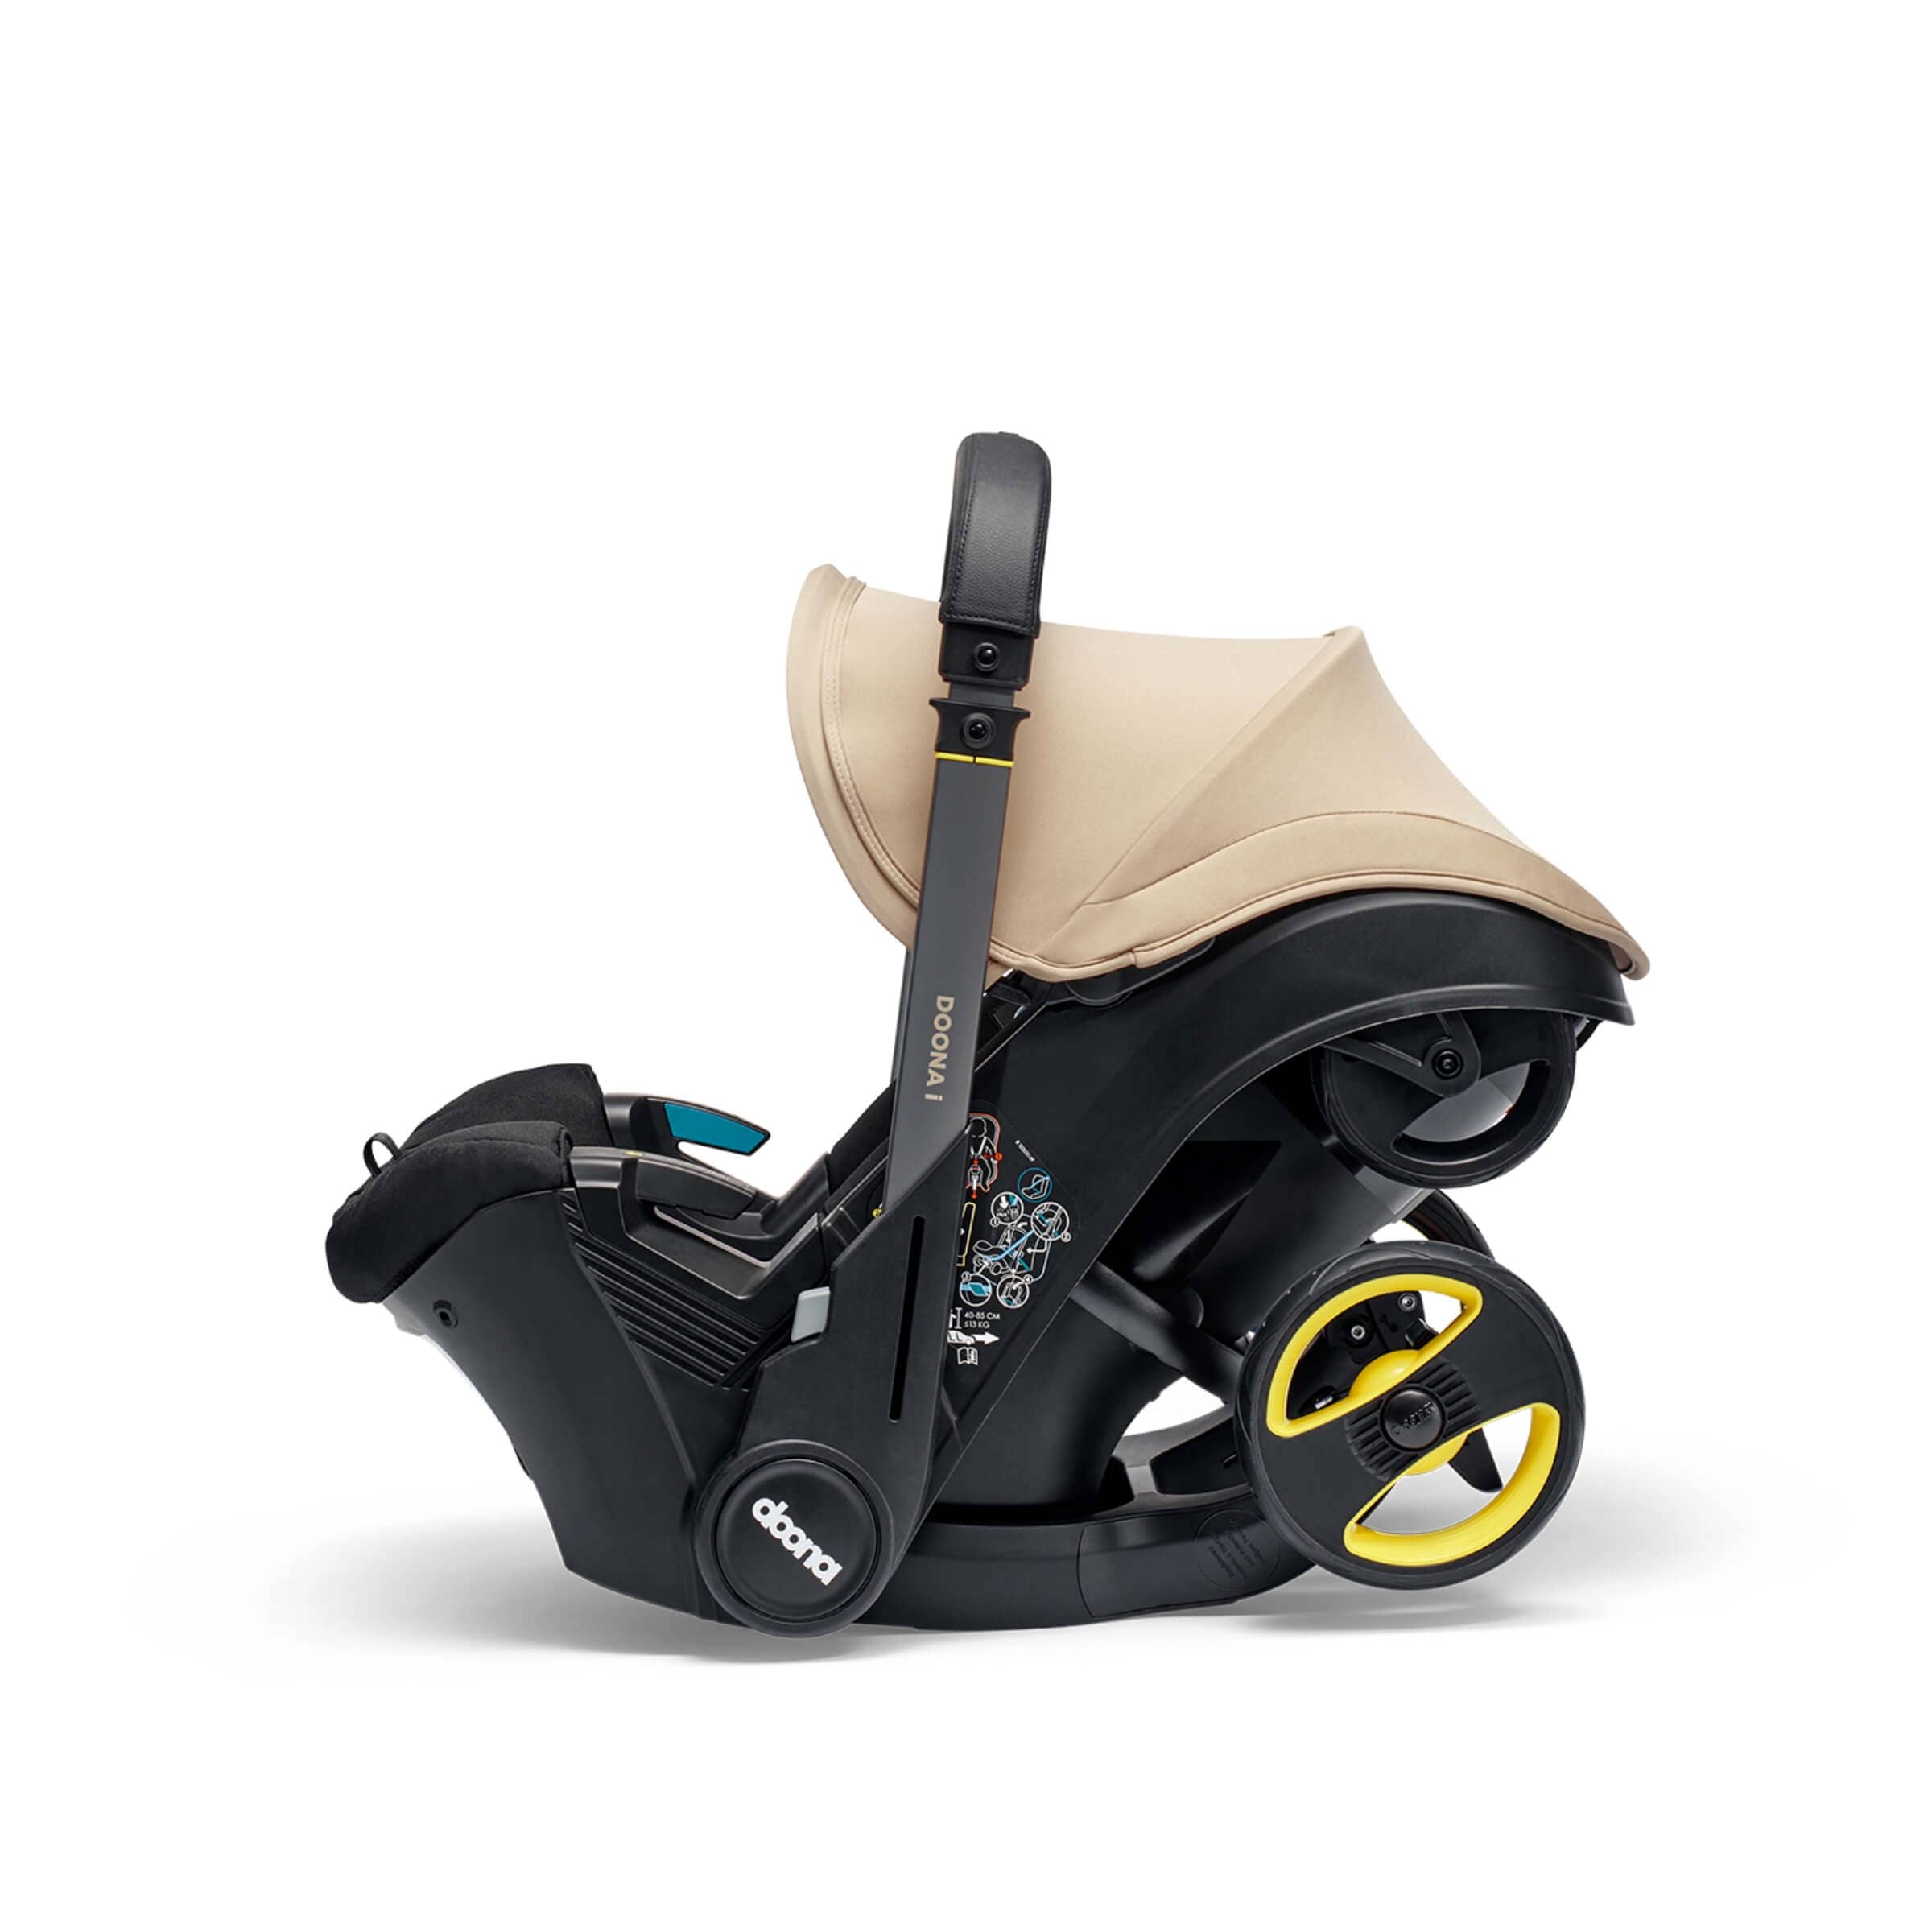 Doona i infant Car Seat - Sahara Sand - For Your Little One